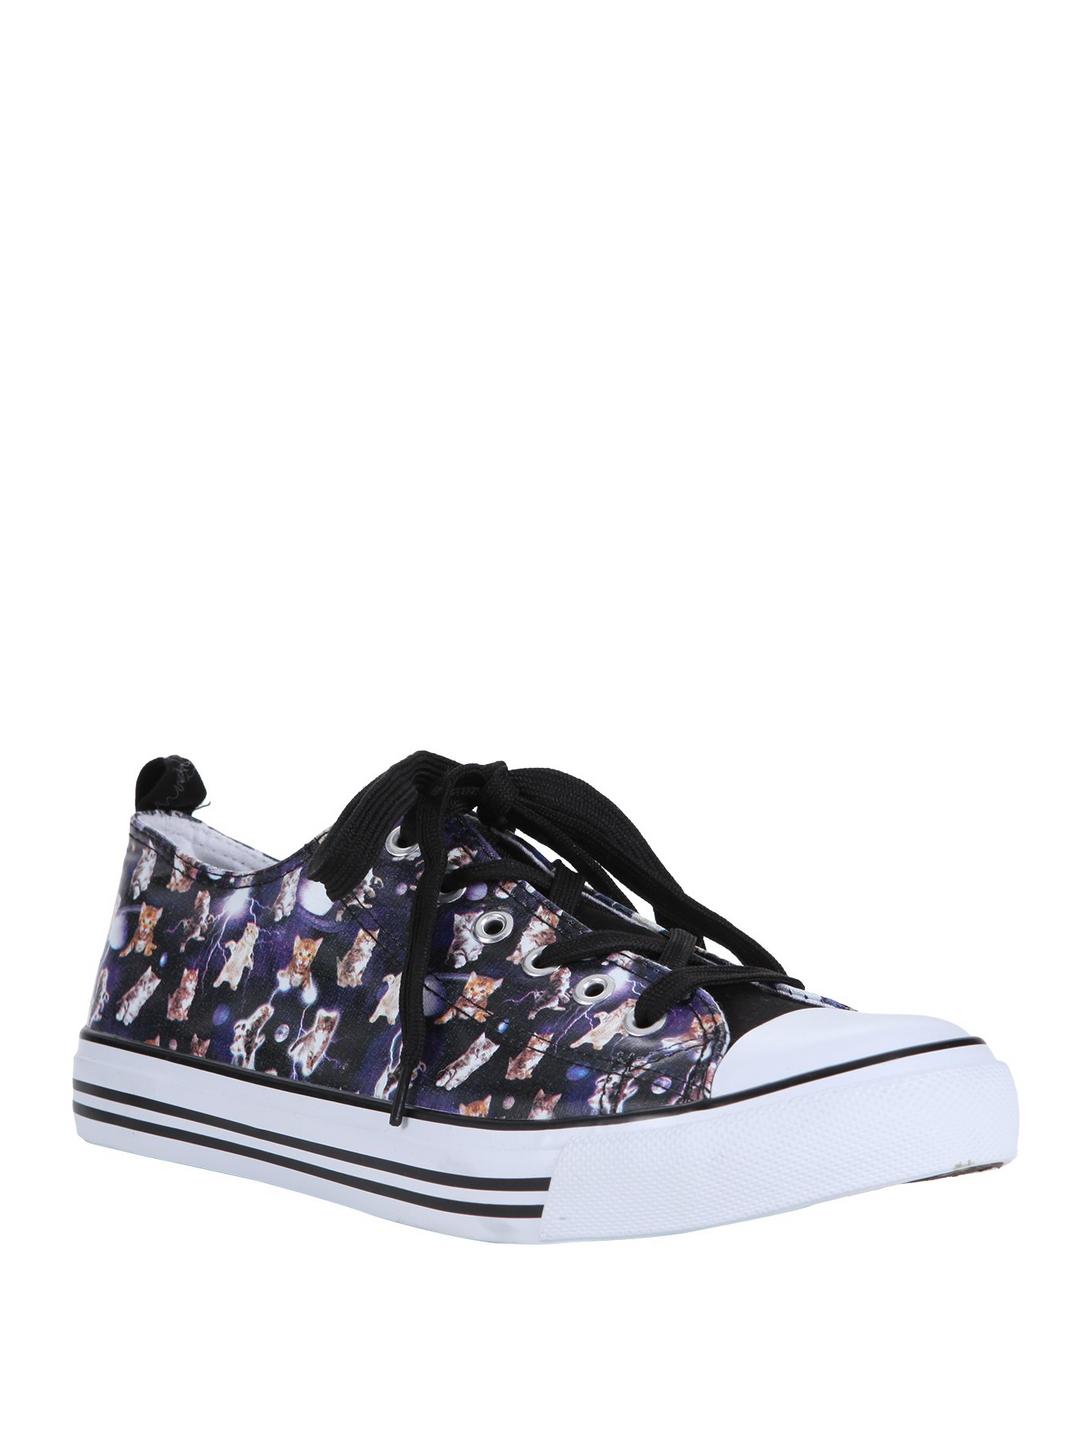 Galaxy Cats Lace-Up Sneakers, BLACK, hi-res